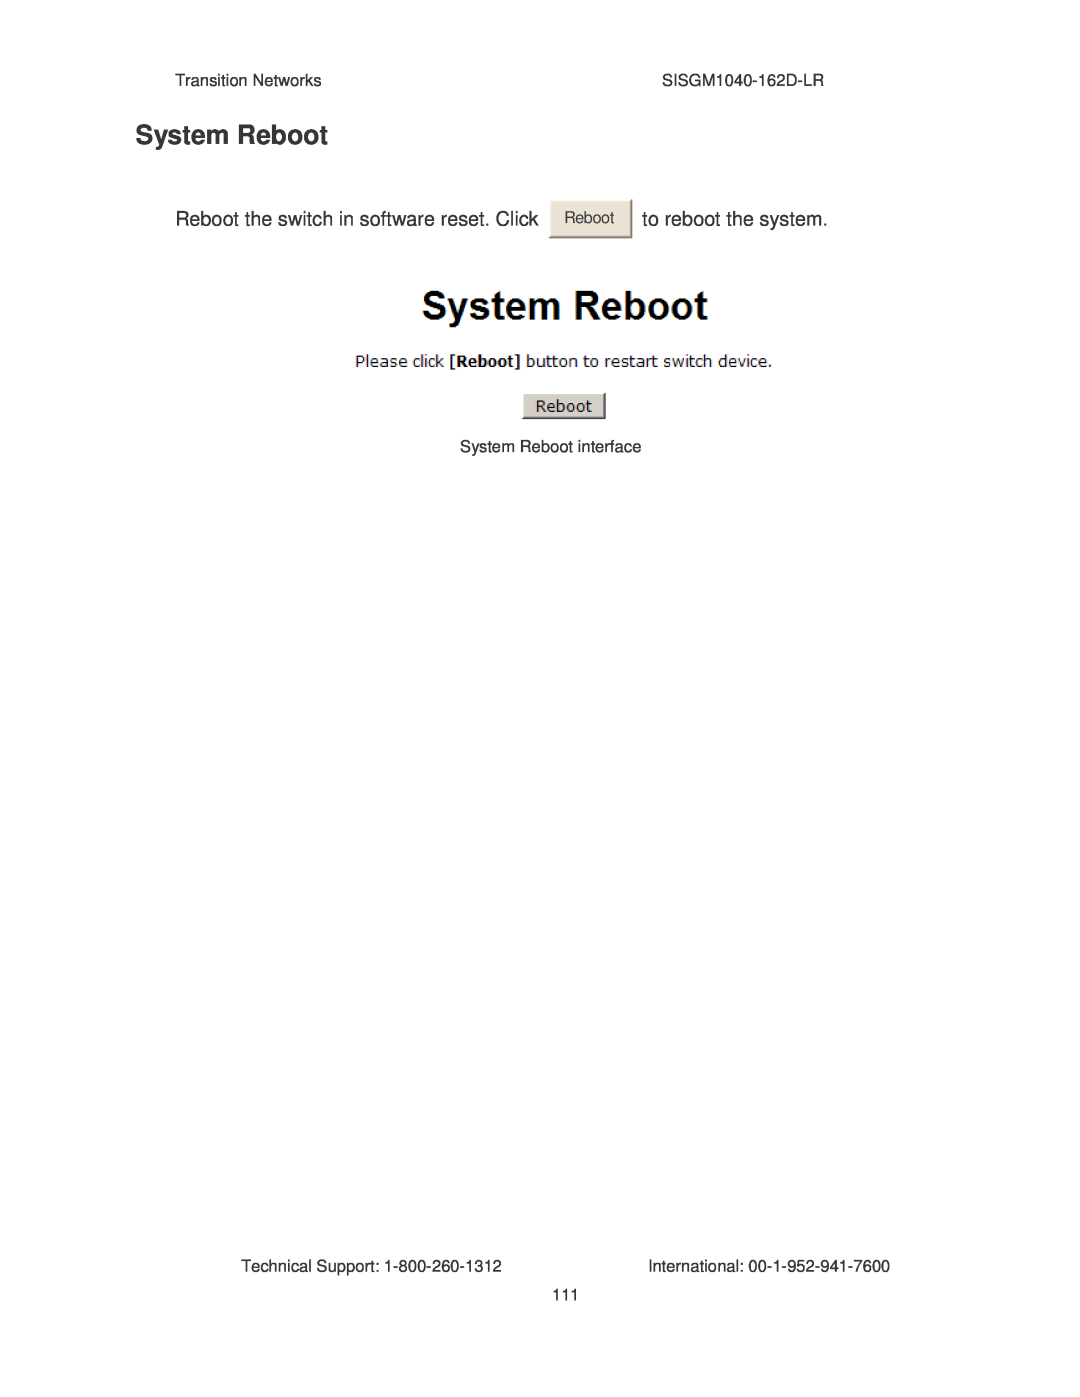 Transition Networks manual Transition Networks, SISGM1040-162D-LR, System Reboot interface, Technical Support 